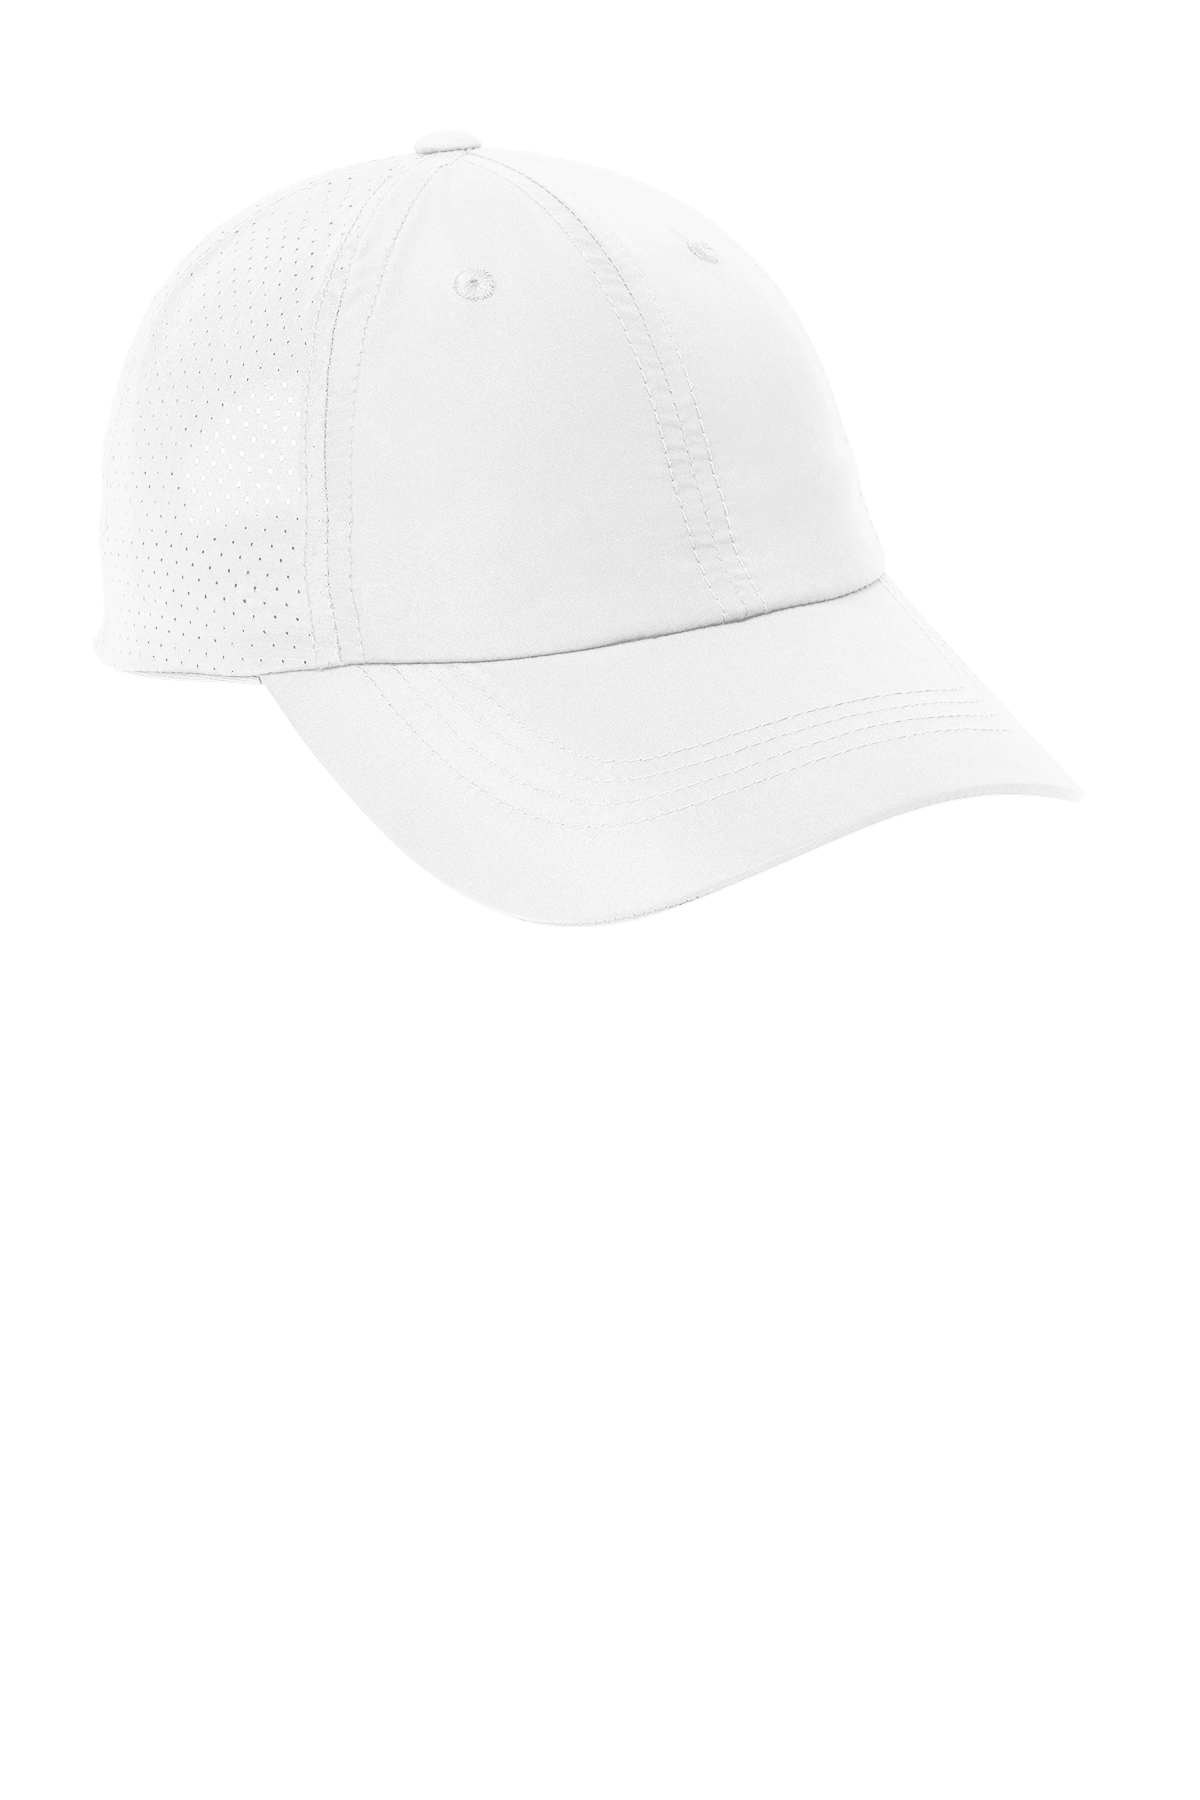 Port Authority Perforated Cap | Product | SanMar